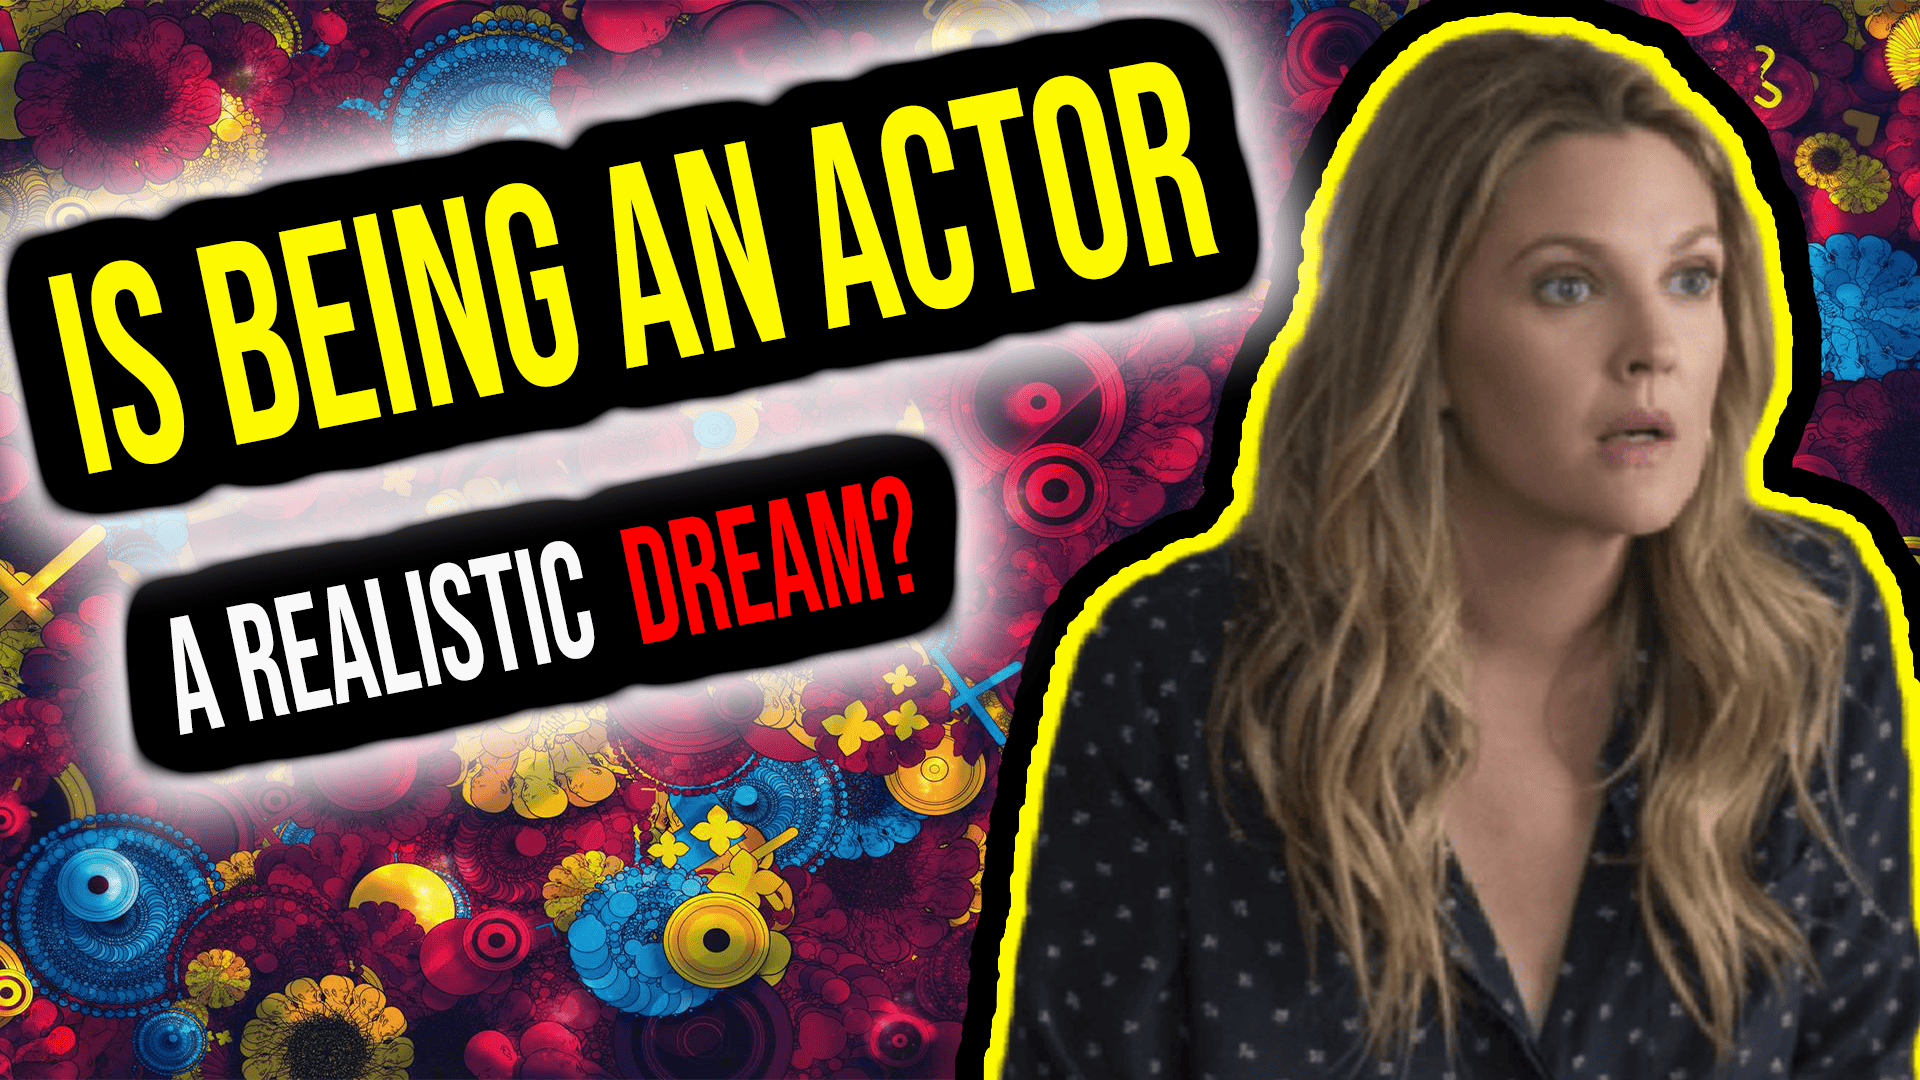 Is Being An Actor Unrealistic? Here’s What You Need To Know Before Taking The Leap